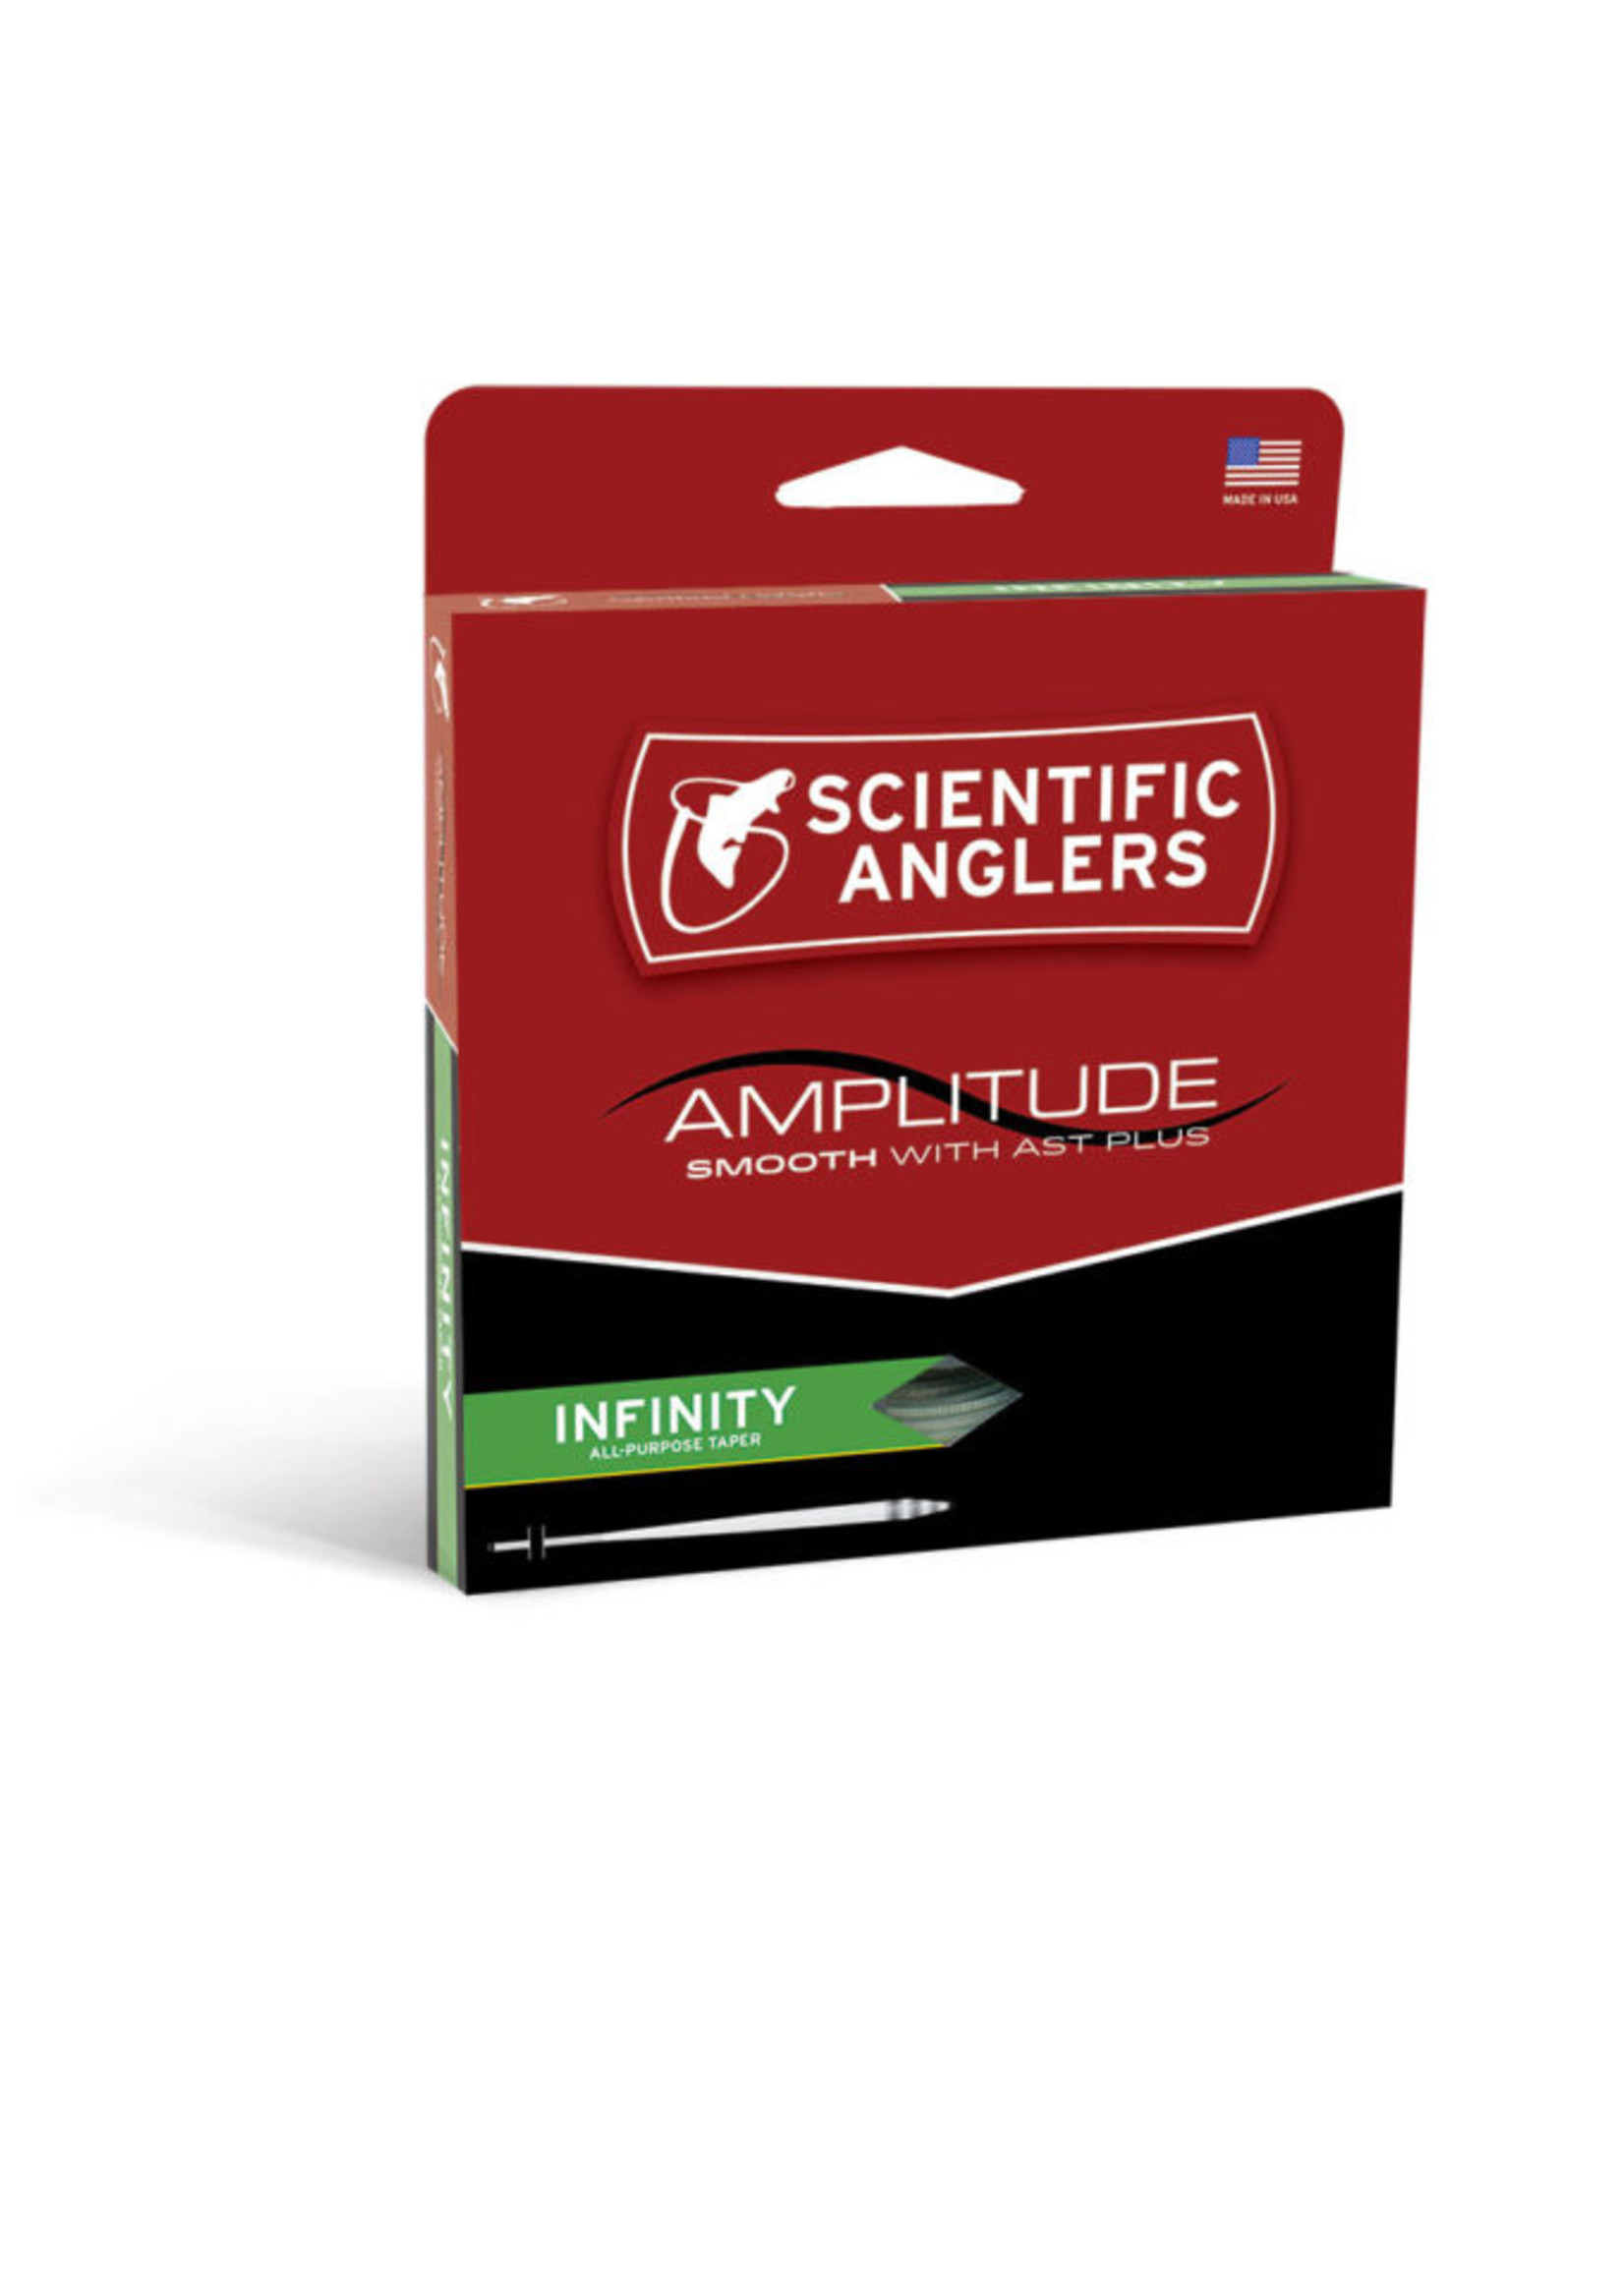 Scientific Anglers Scientific Anglers Amplitude Smooth Infinity Fly Line